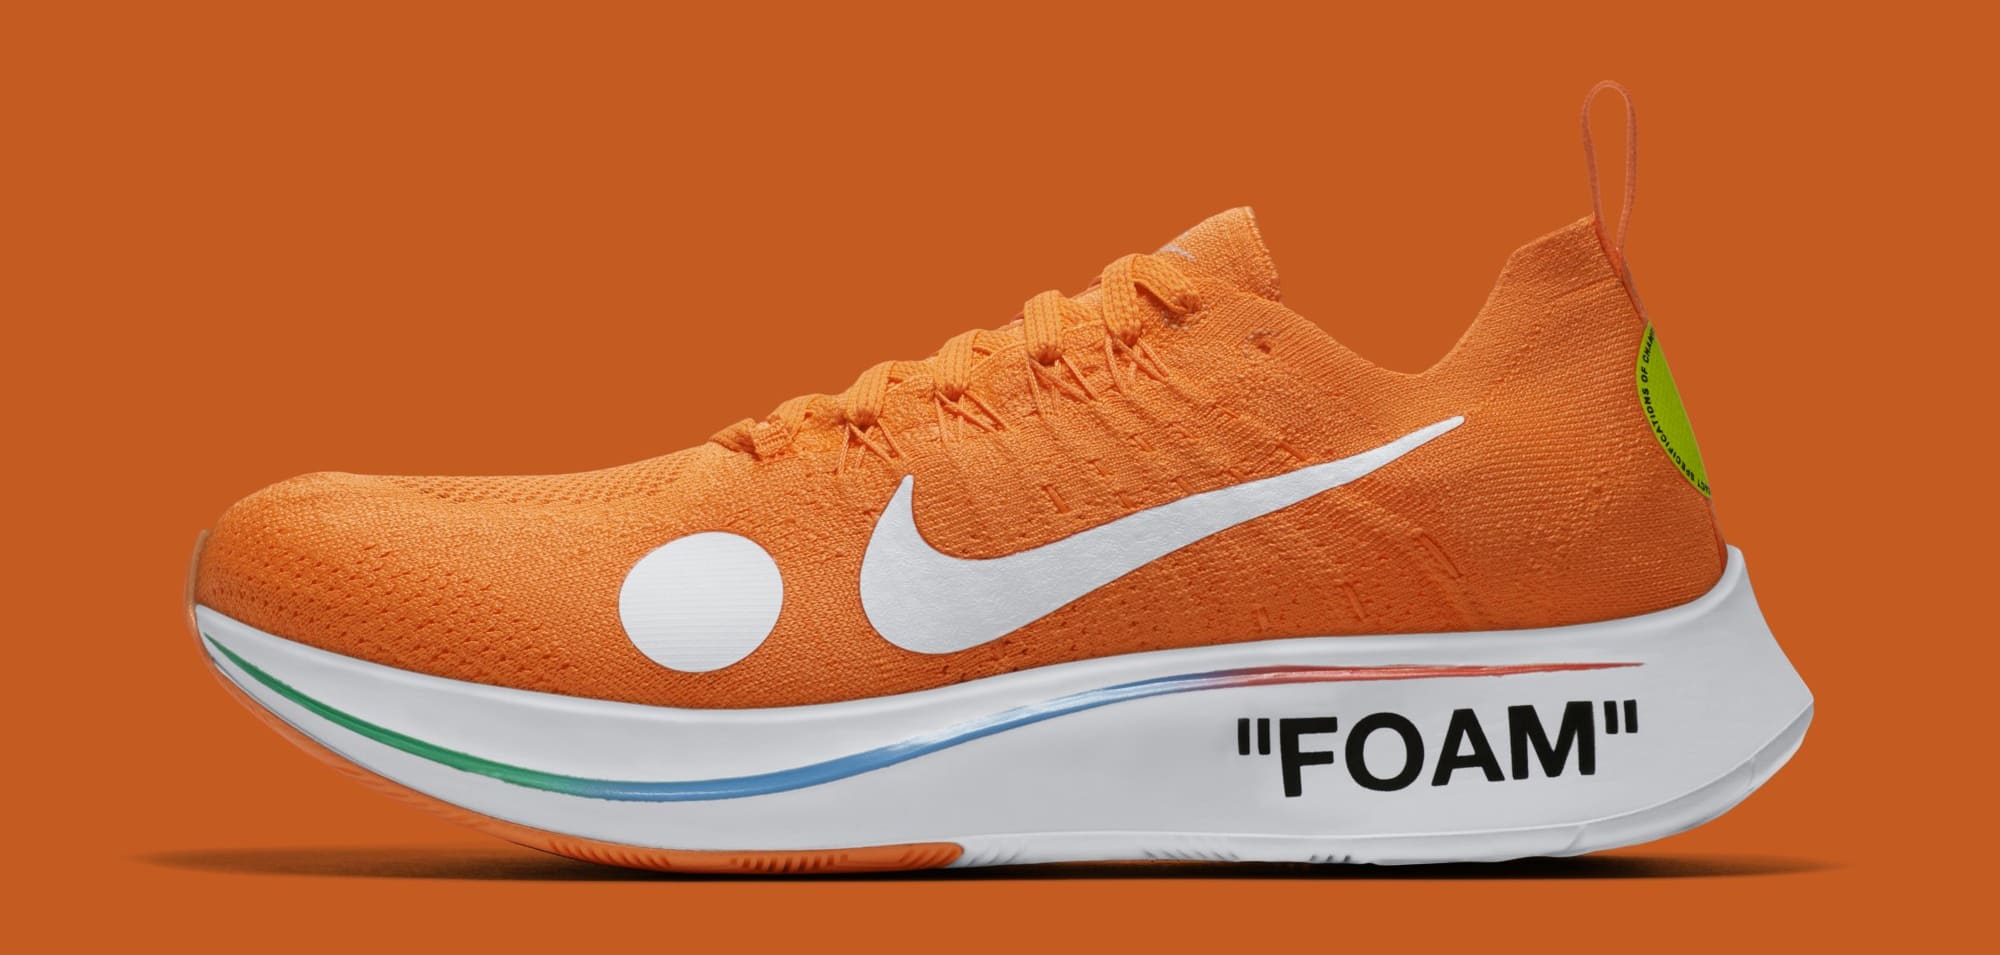 Nike Introduce “Football, Mon Amour” OFF-WHITE Collection